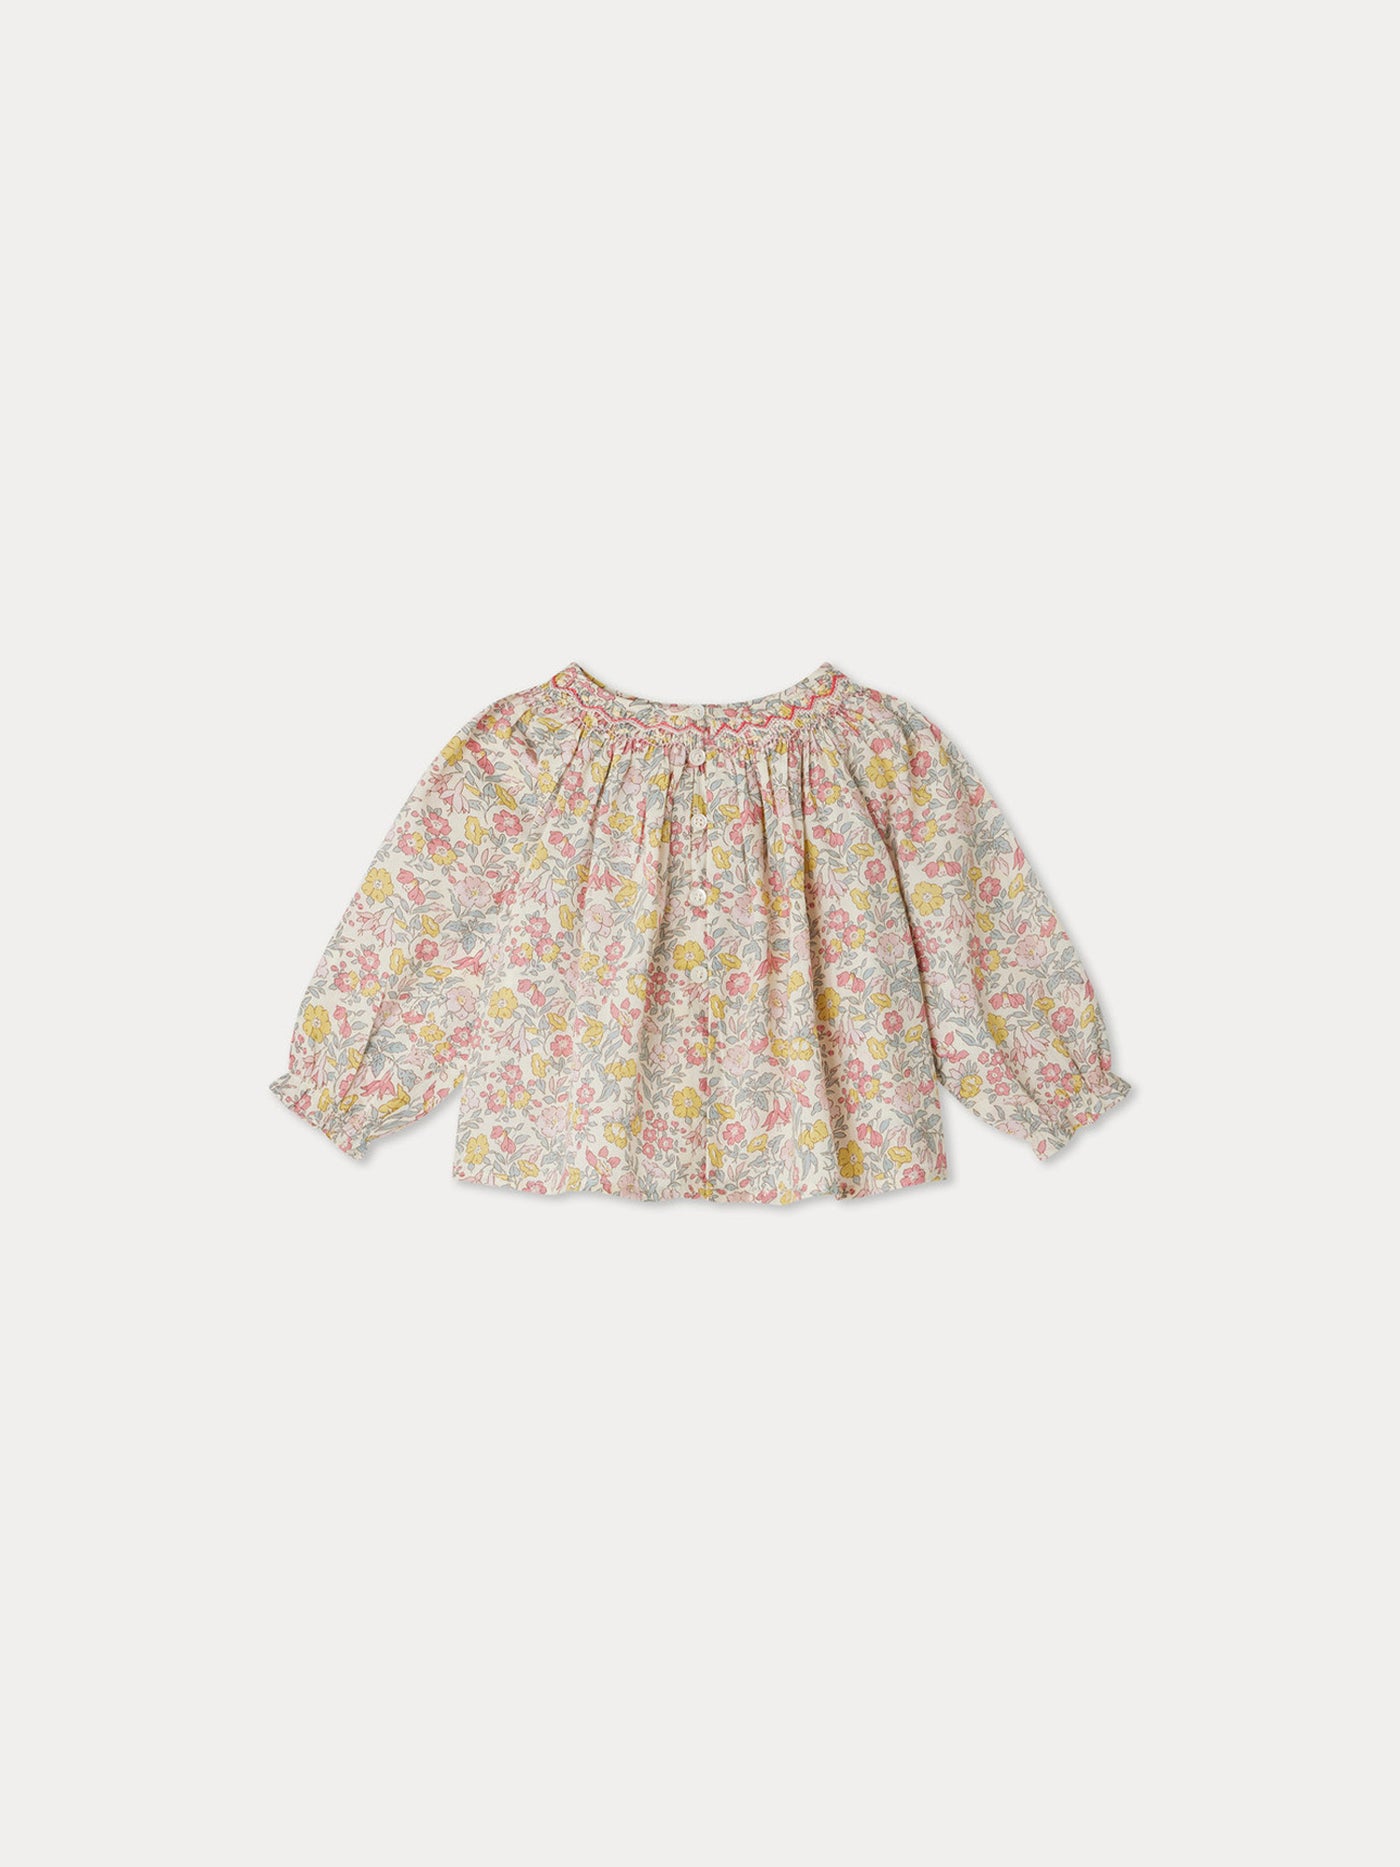 Griotte smocked blouse in pink organic Liberty fabric